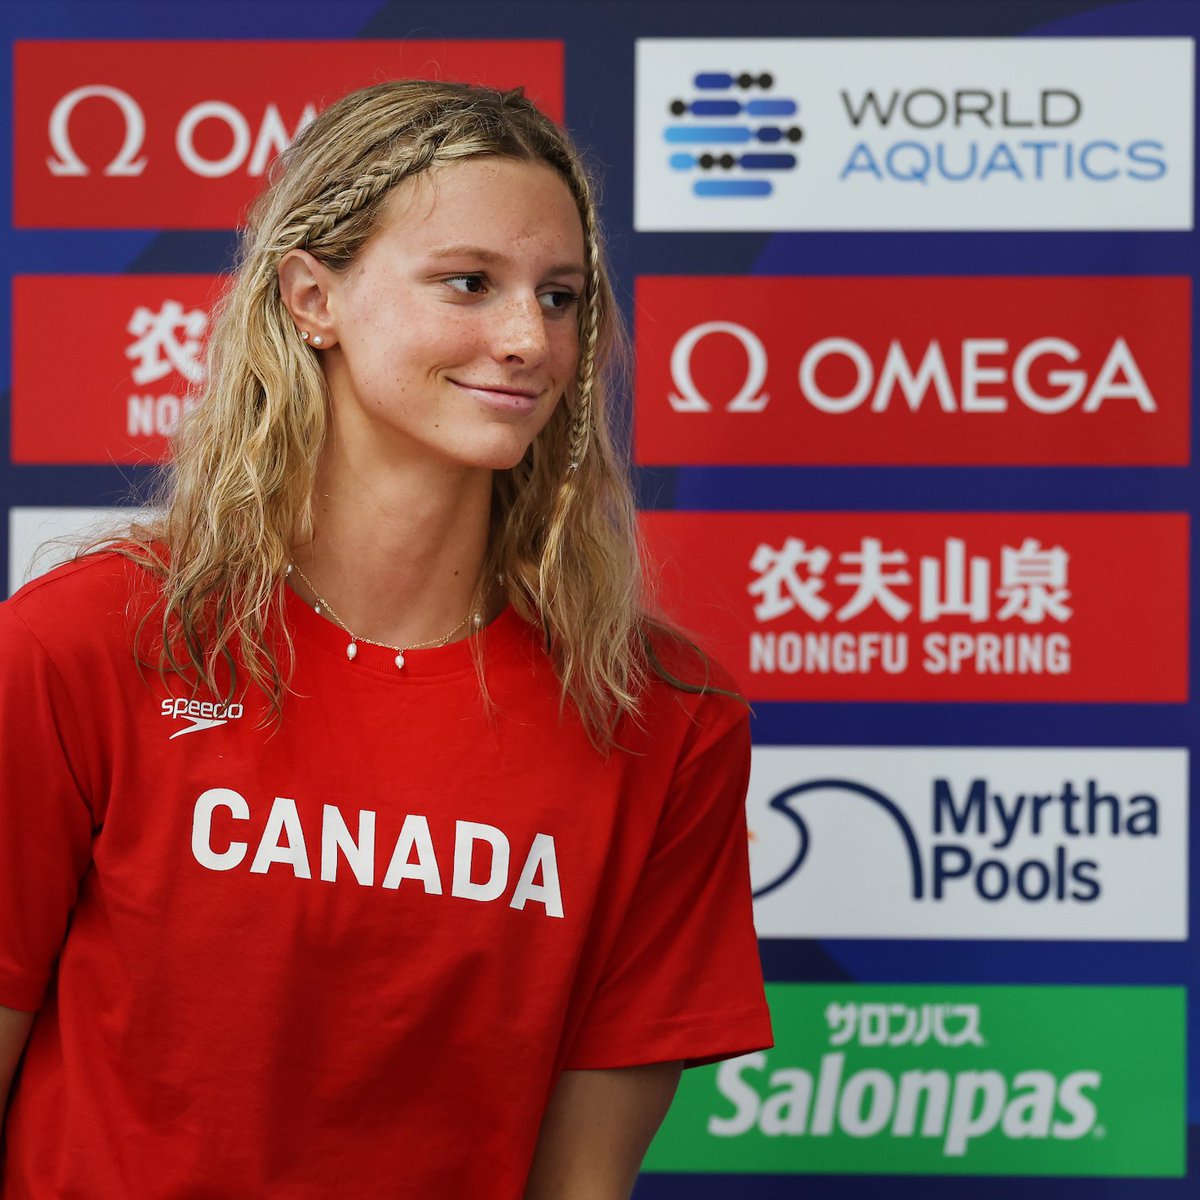 After breaking world records and being a back-to-back World Champion, Summer McIntosh is named Canadian Press Athlete of the Year🙌 🔗 tinyurl.com/37tcu84c